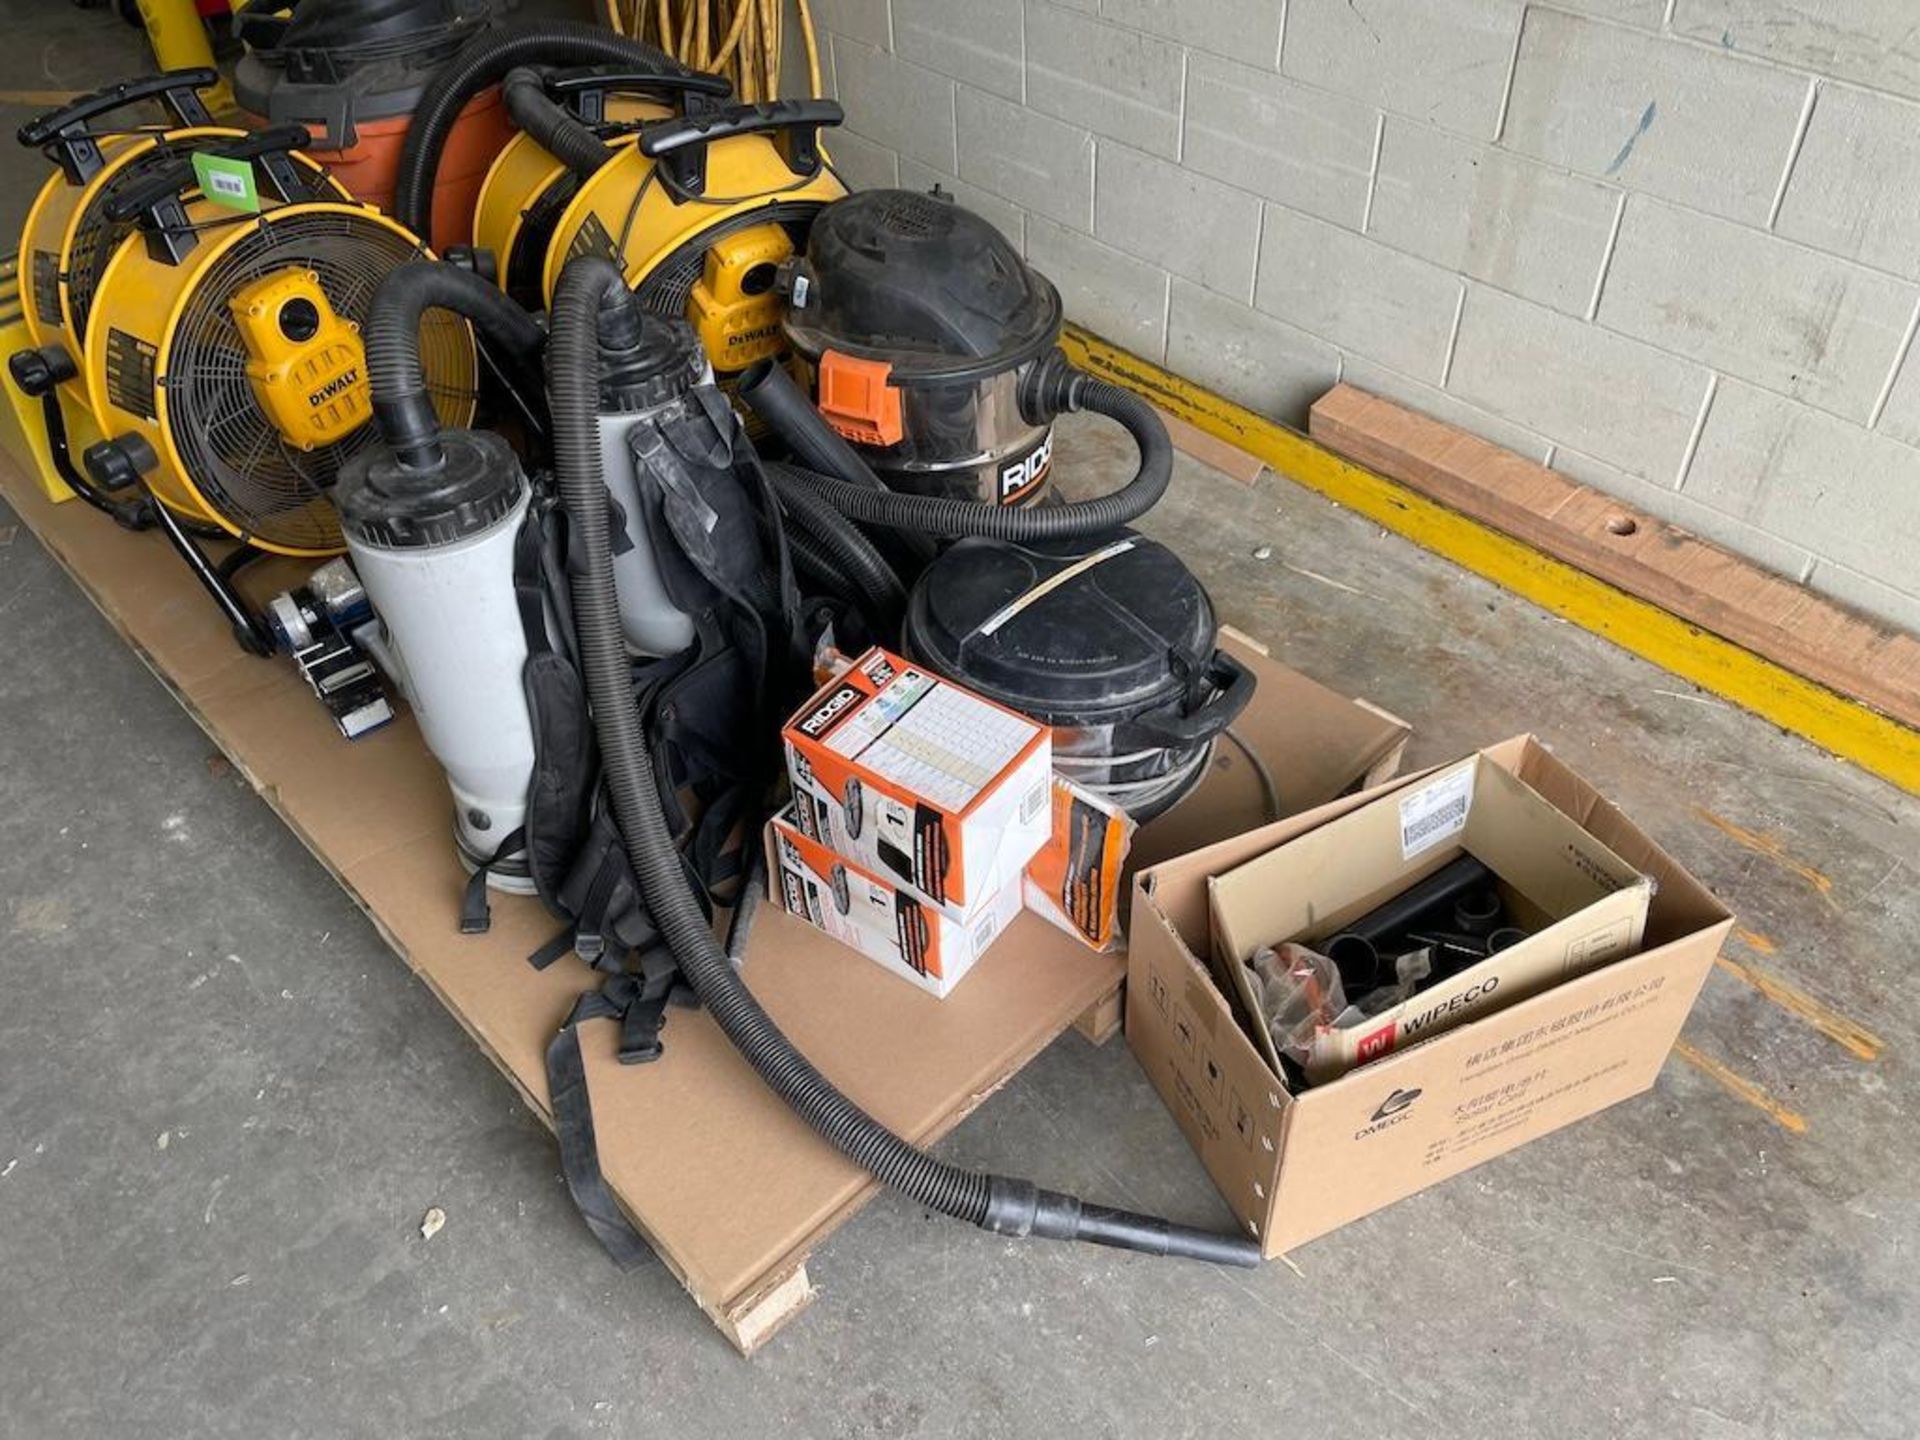 LOT: SKID W FANS, PROVAC, VACUUM CLEANERS [TROIS RIVIERES] *PLEASE NOTE, EXCLUSIVE RIGGING FEE OF $5 - Image 3 of 3